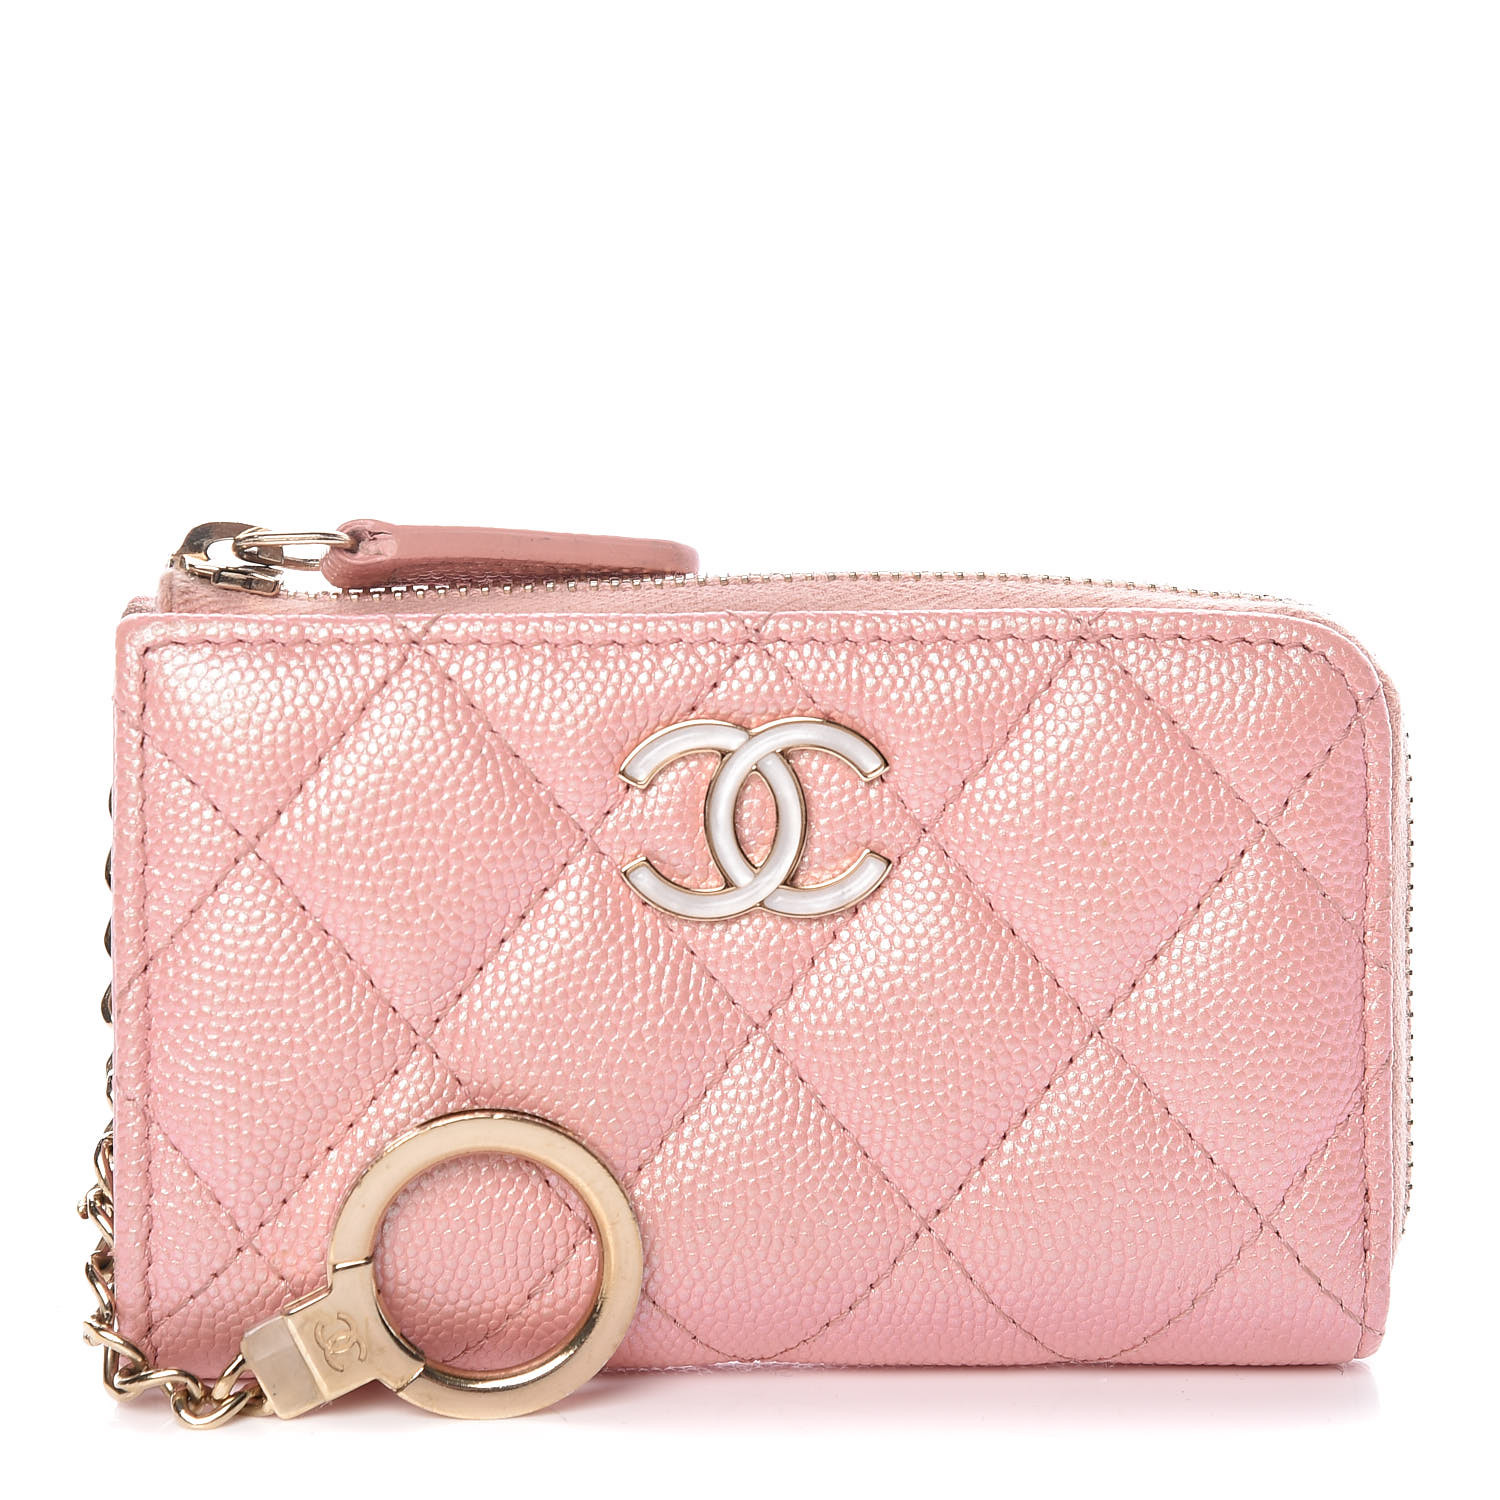 CHANEL Iridescent Caviar Quilted Zipped Key Holder Case Rose Pink 403083